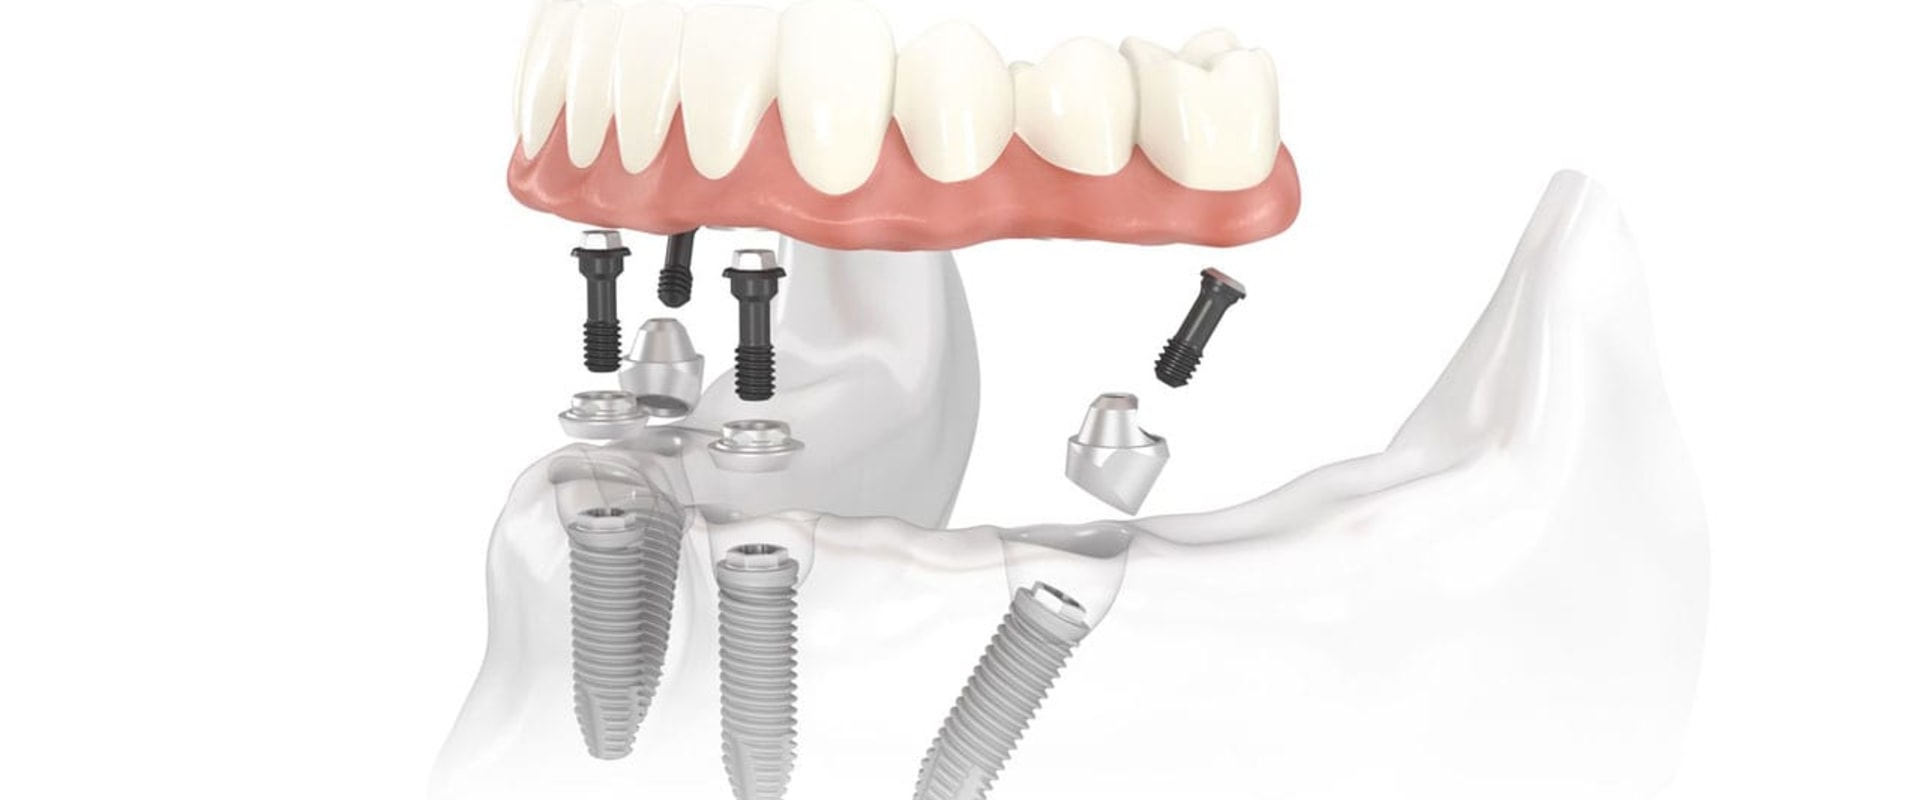 How Often Should You Visit the Dentist for All-on-4 Dental Implants?